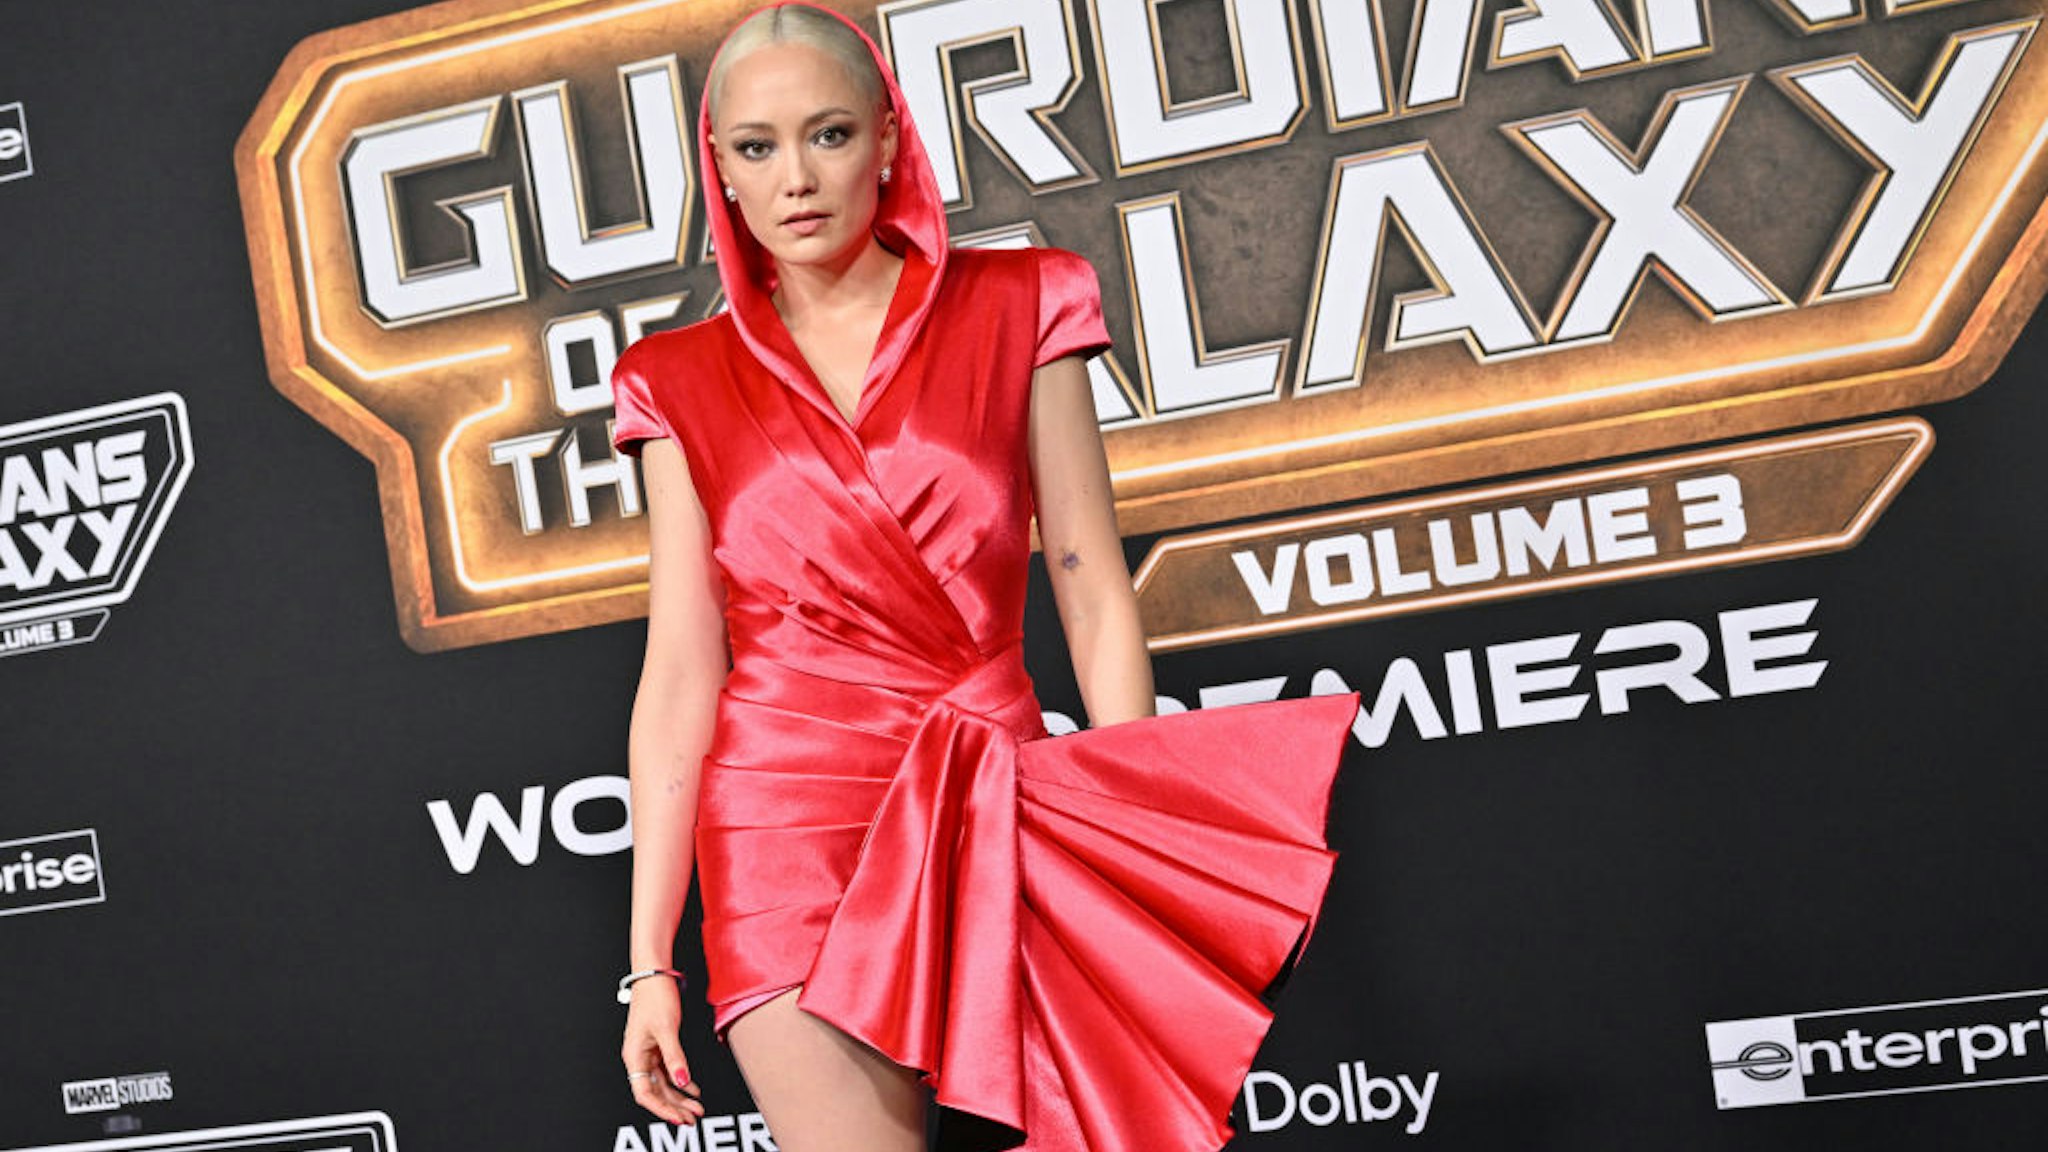 HOLLYWOOD, CALIFORNIA - APRIL 27: Pom Klementieff attends the World Premiere of Marvel Studios' "Guardians of the Galaxy Vol. 3" on April 27, 2023 in Hollywood, California. (Photo by Axelle/Bauer-Griffin/FilmMagic)